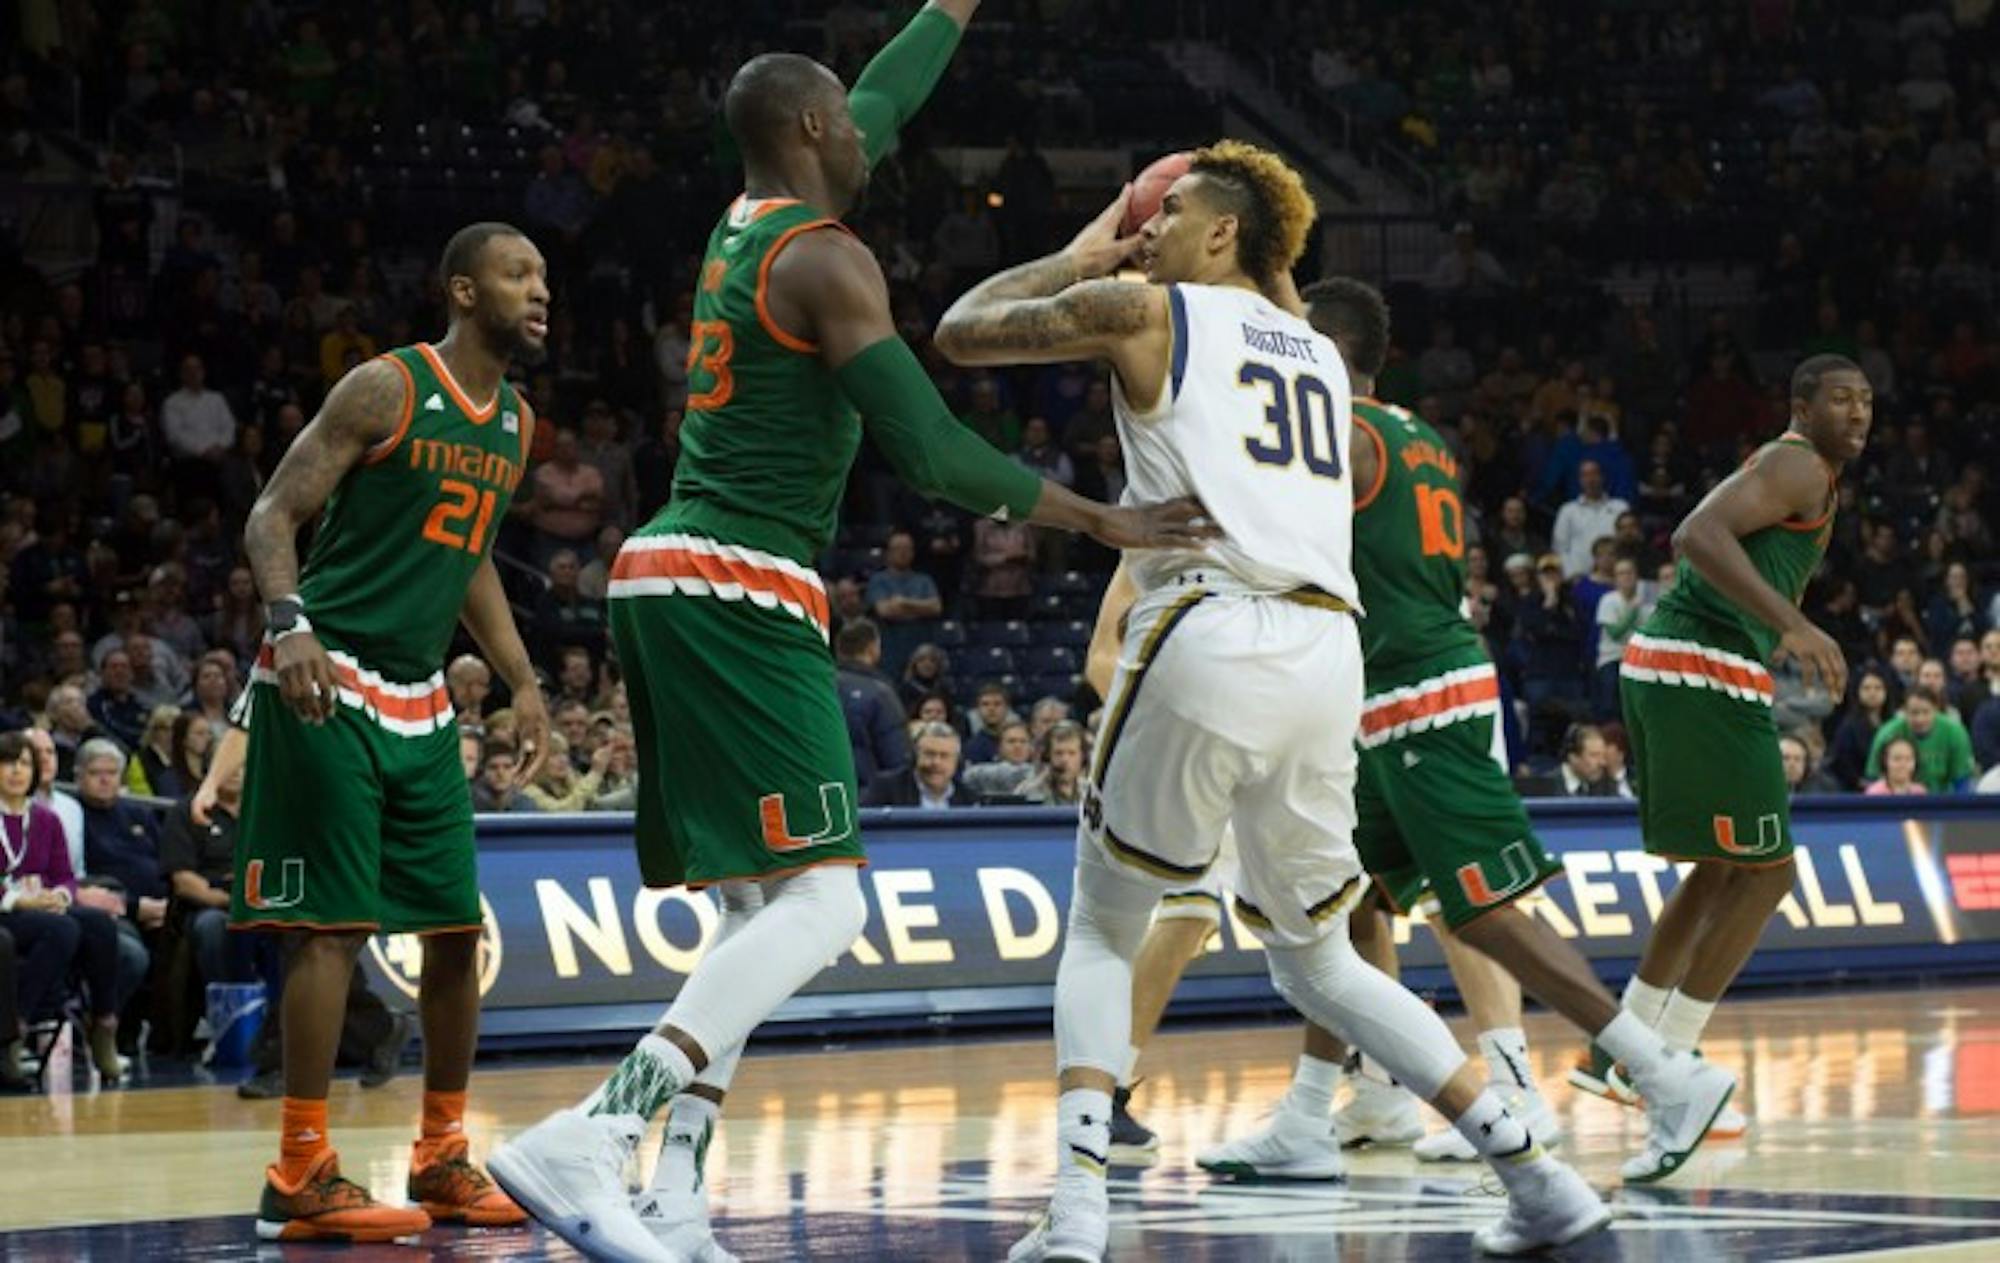 Irish senior forward Zach Auguste looks to score a basket during Notre Dame’s 68-50 loss to Miami (Fla.) on March 2 at Purcell Pavilion. Auguste is among the national leaders in double-doubles with 19.